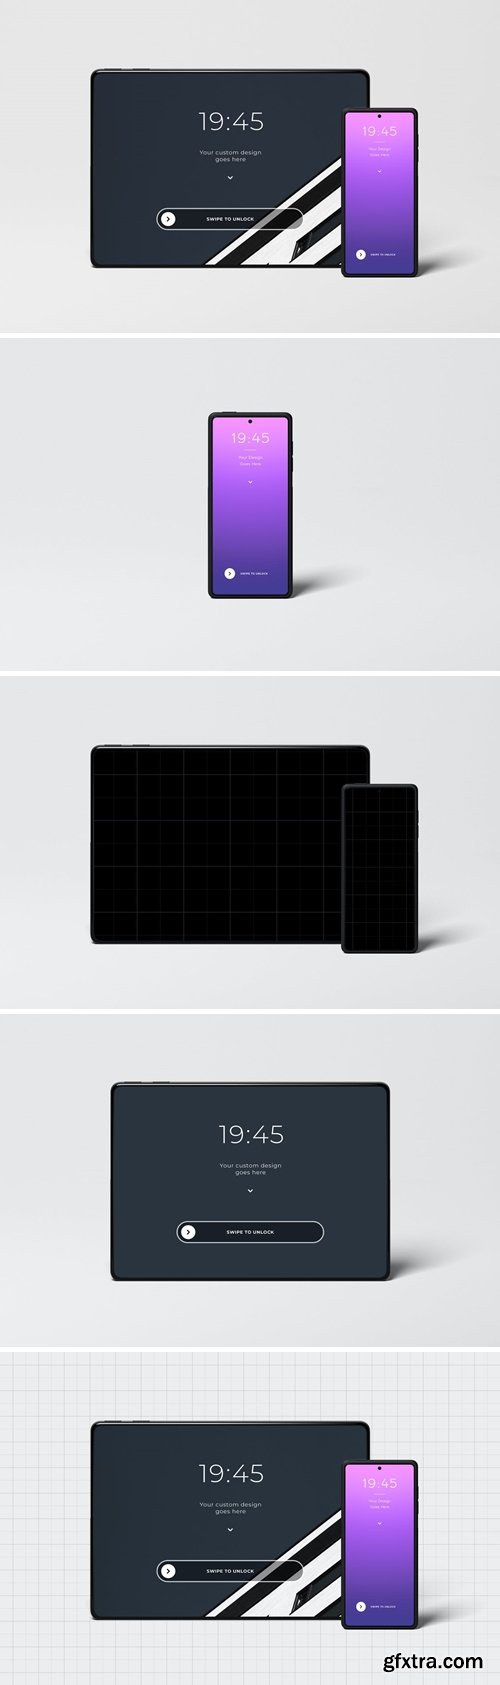 Tablet And Smartphone Mockup